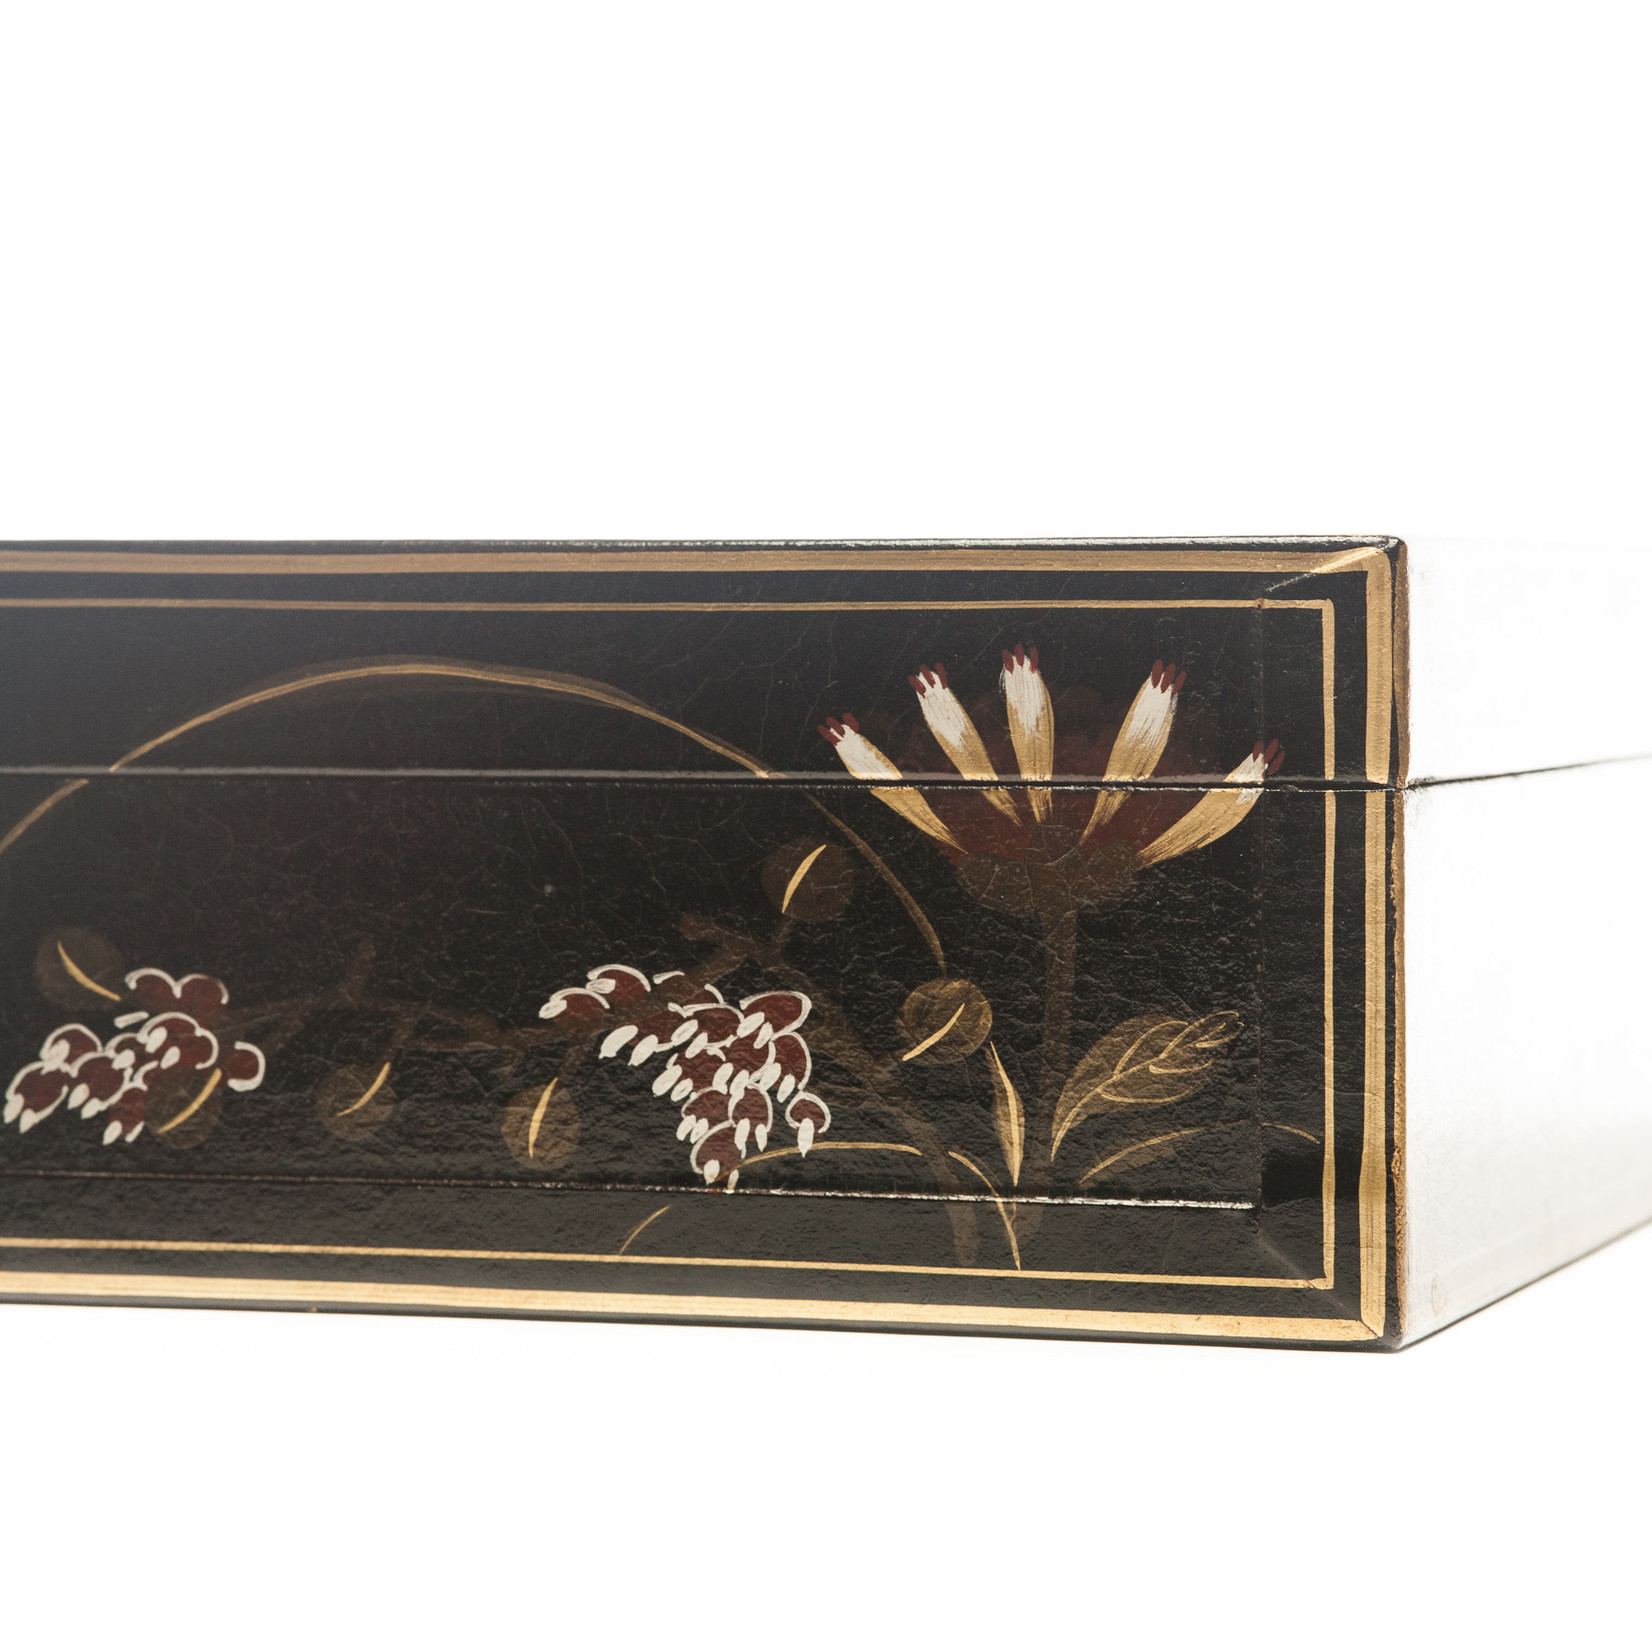 Lawrence & Scott Black Thrive Leather Box (17") with hand-painted Chrysanthemums